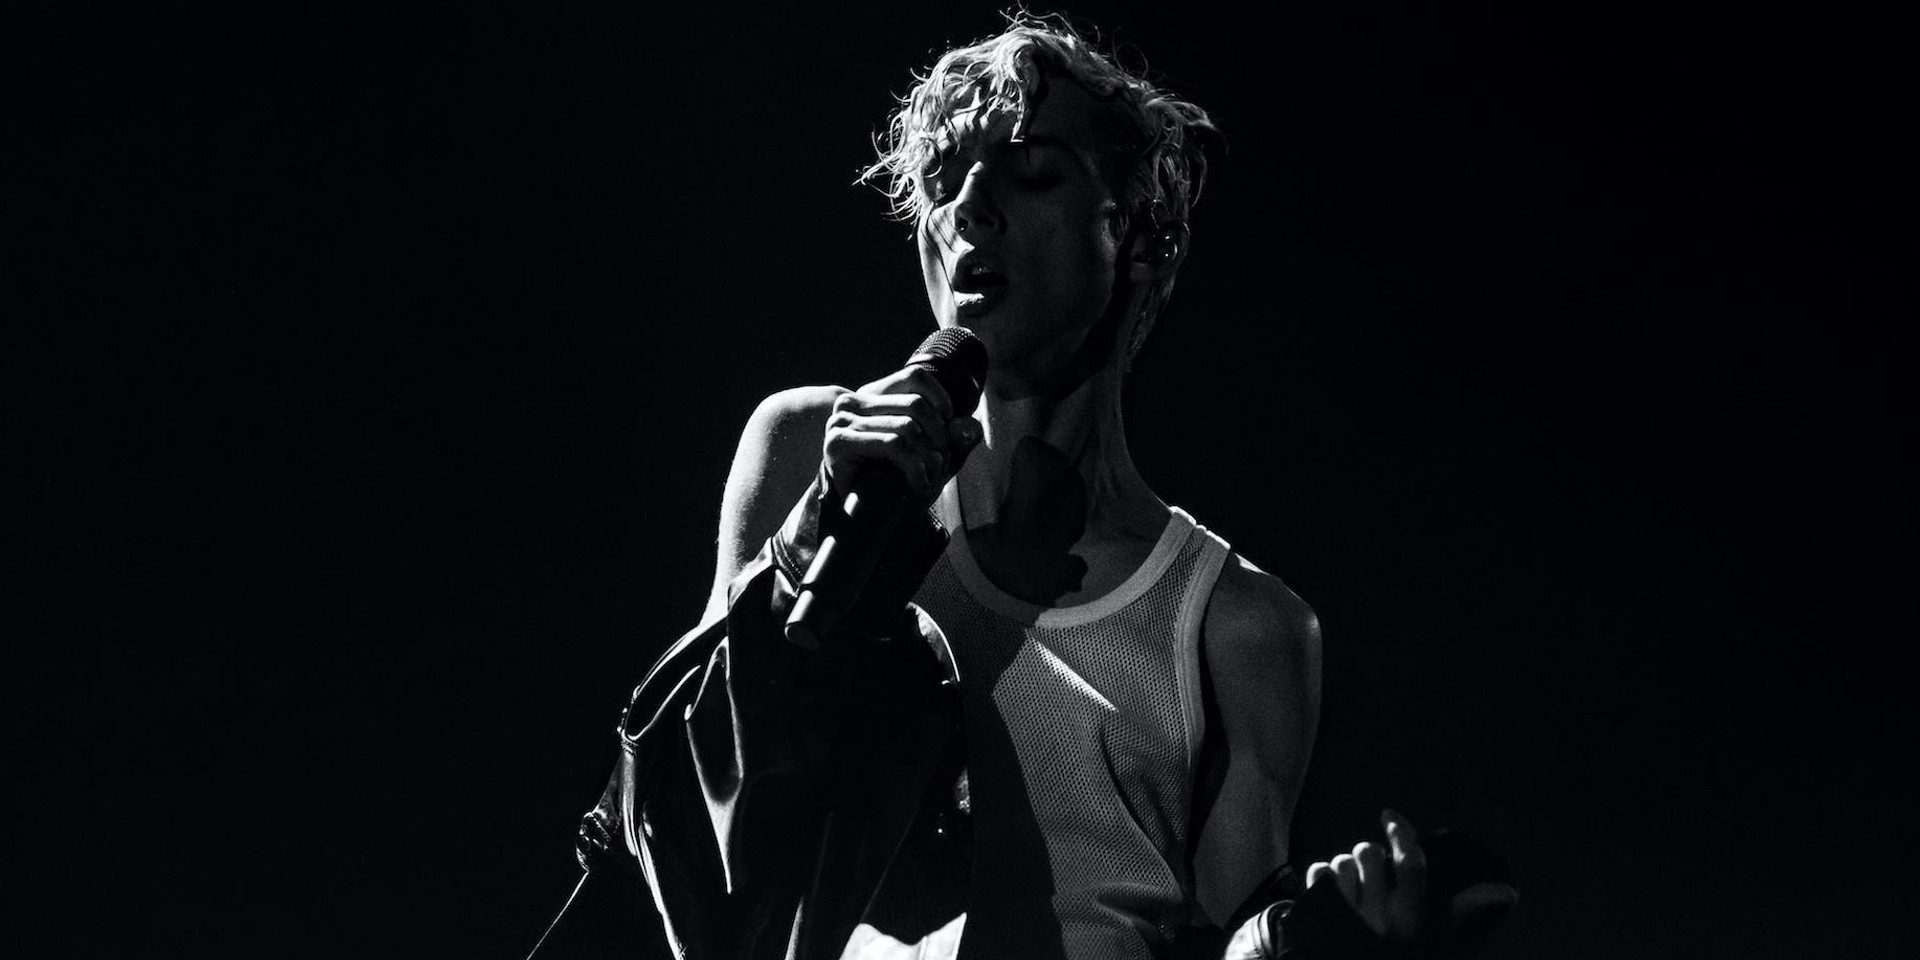 Venue and ticket details announced for Troye Sivan's first Manila concert